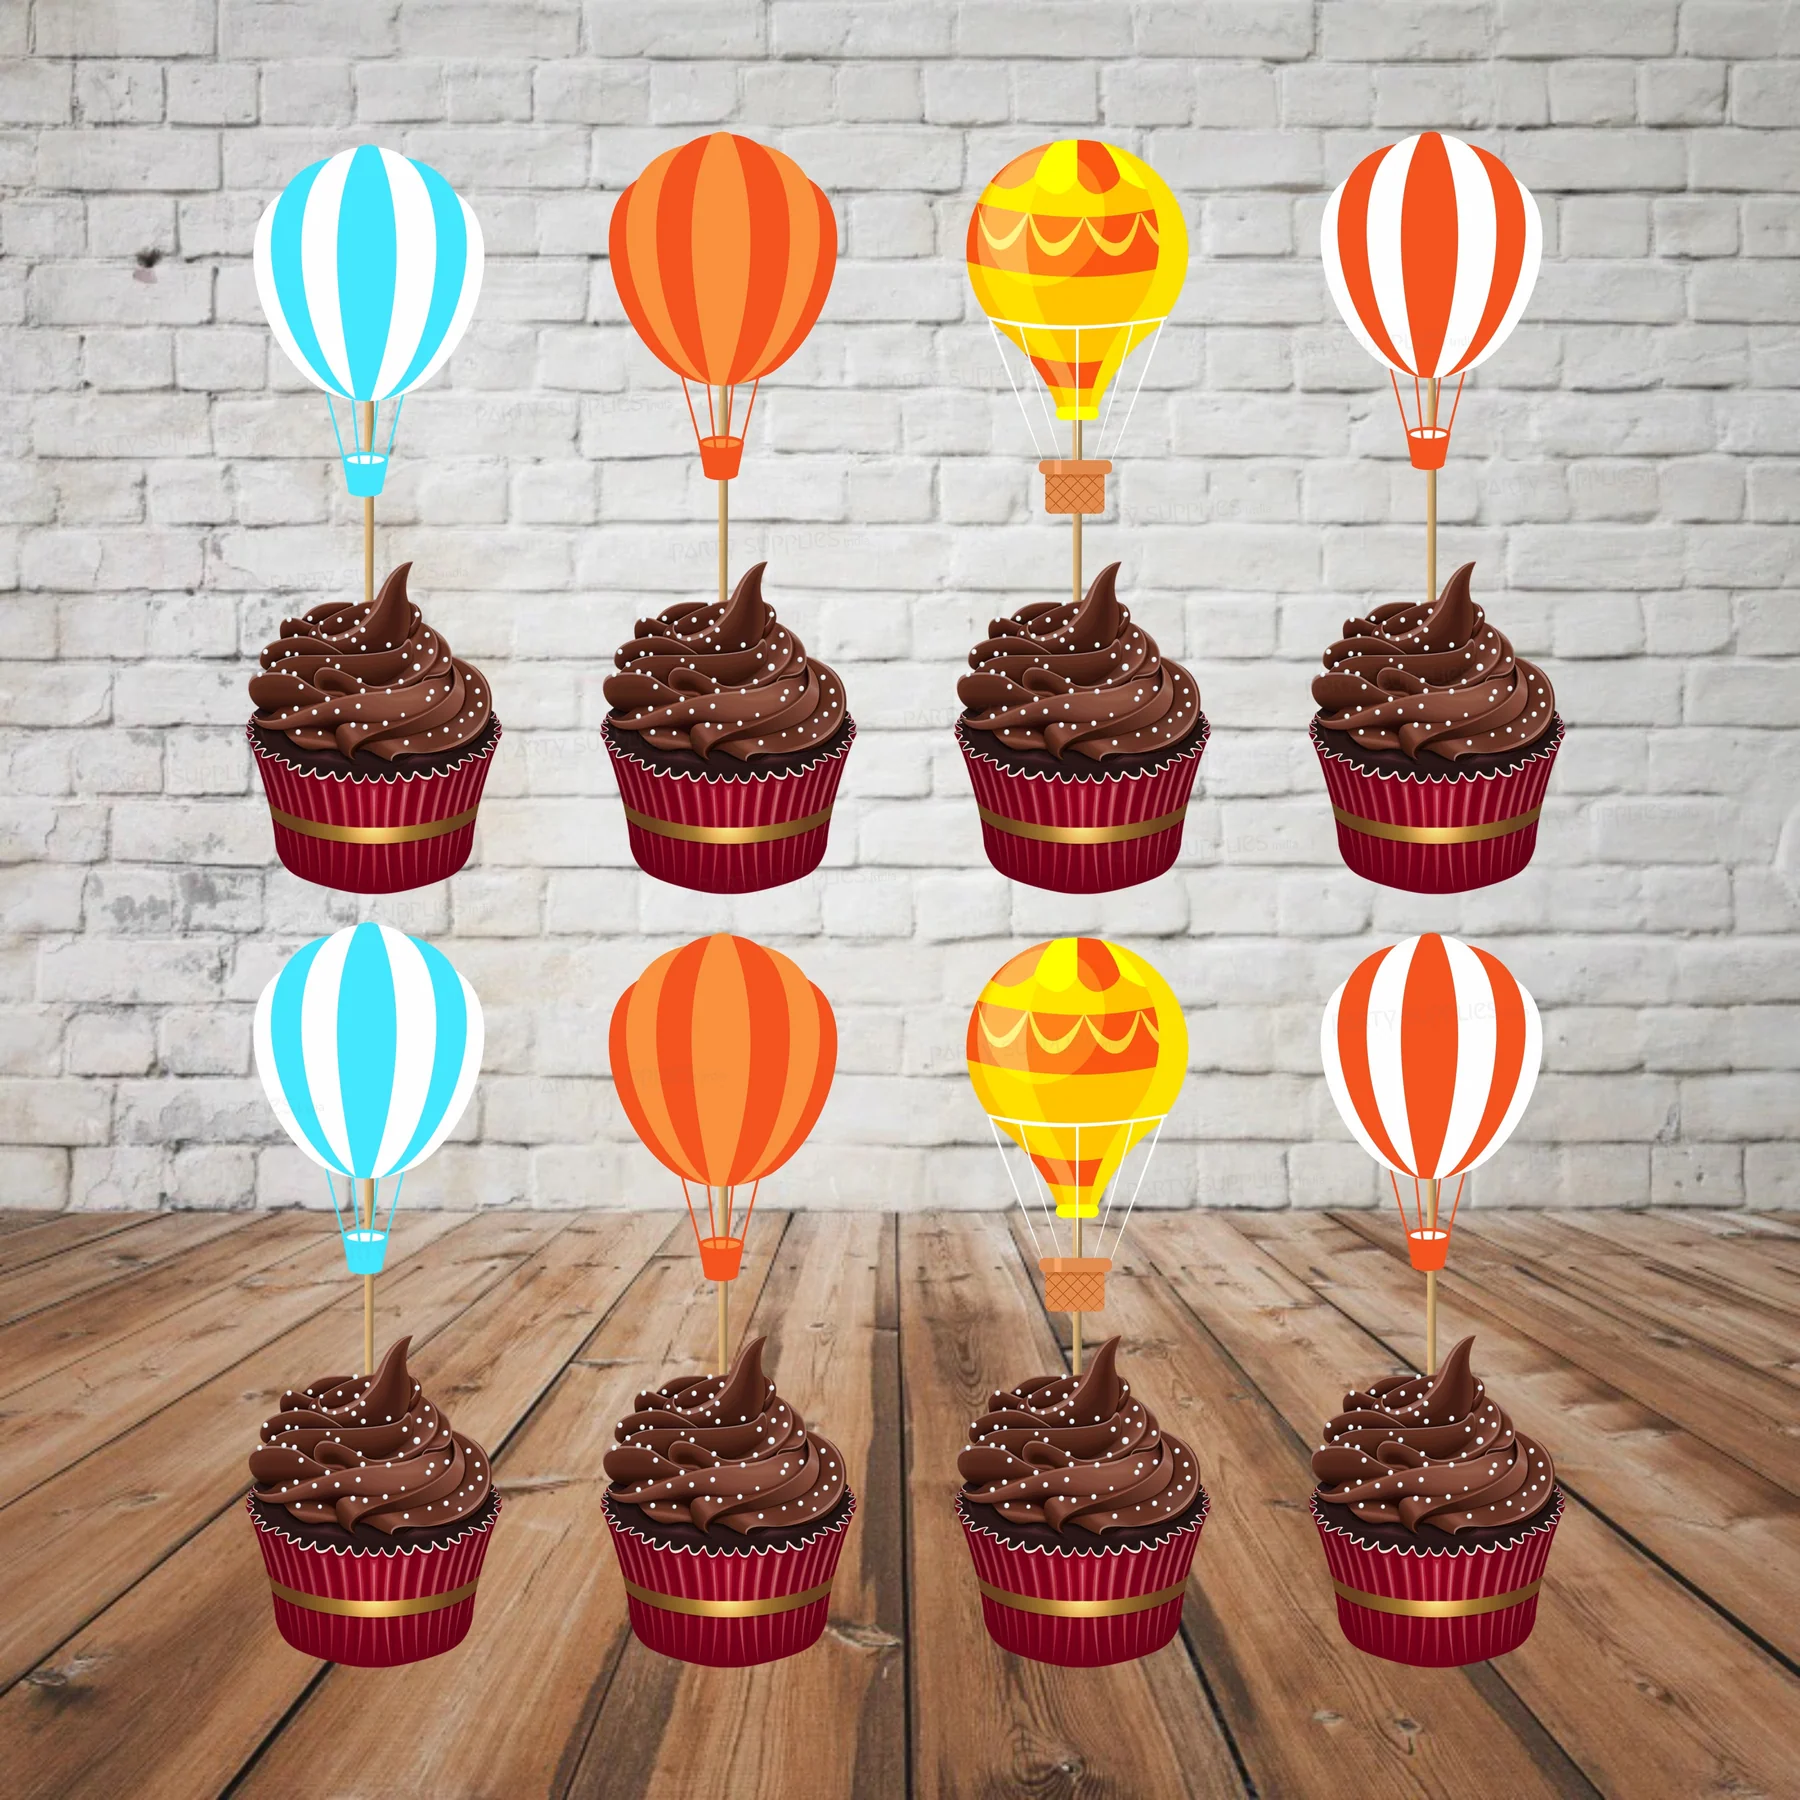 Balloon Toppers for Cupcakes .jpg